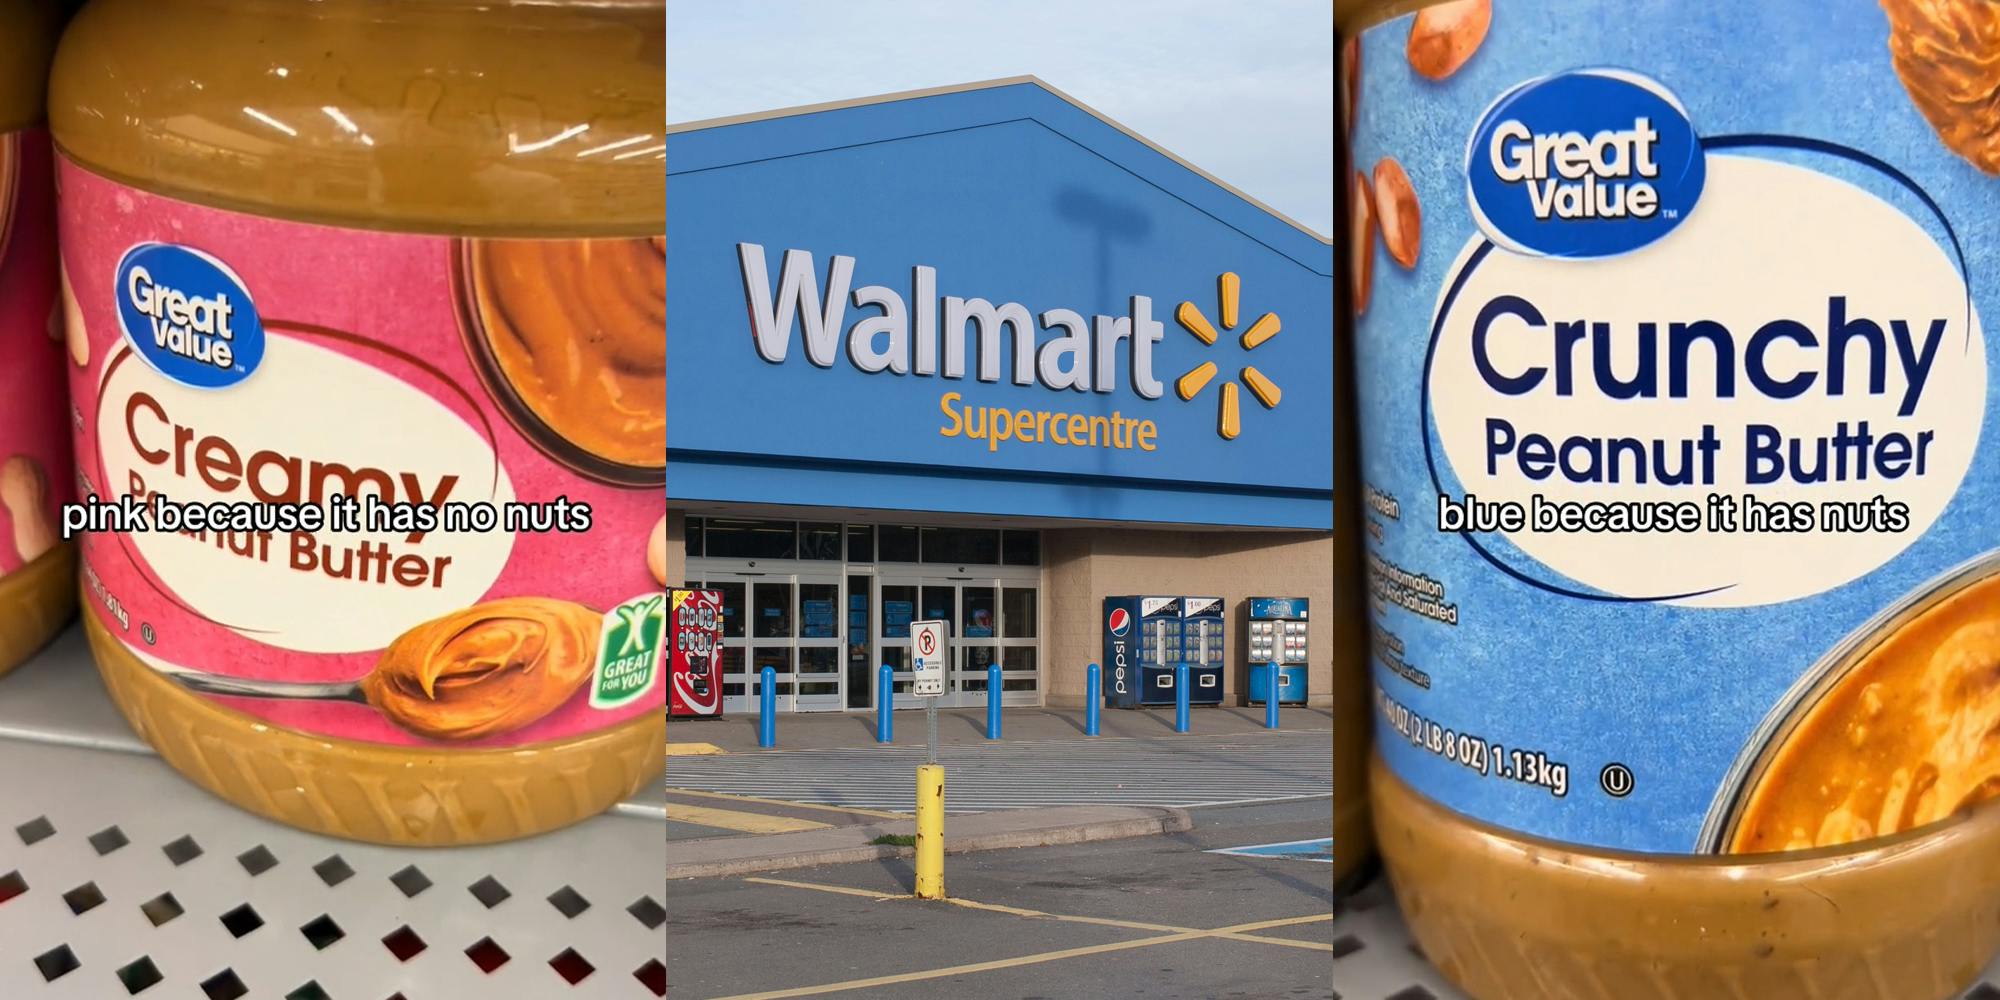 peanut butter on Walmart display with caption "pink because it has no nuts" (l) Walmart building with sign (c) peanut butter on Walmart display with caption "blue because it has nuts" (r)